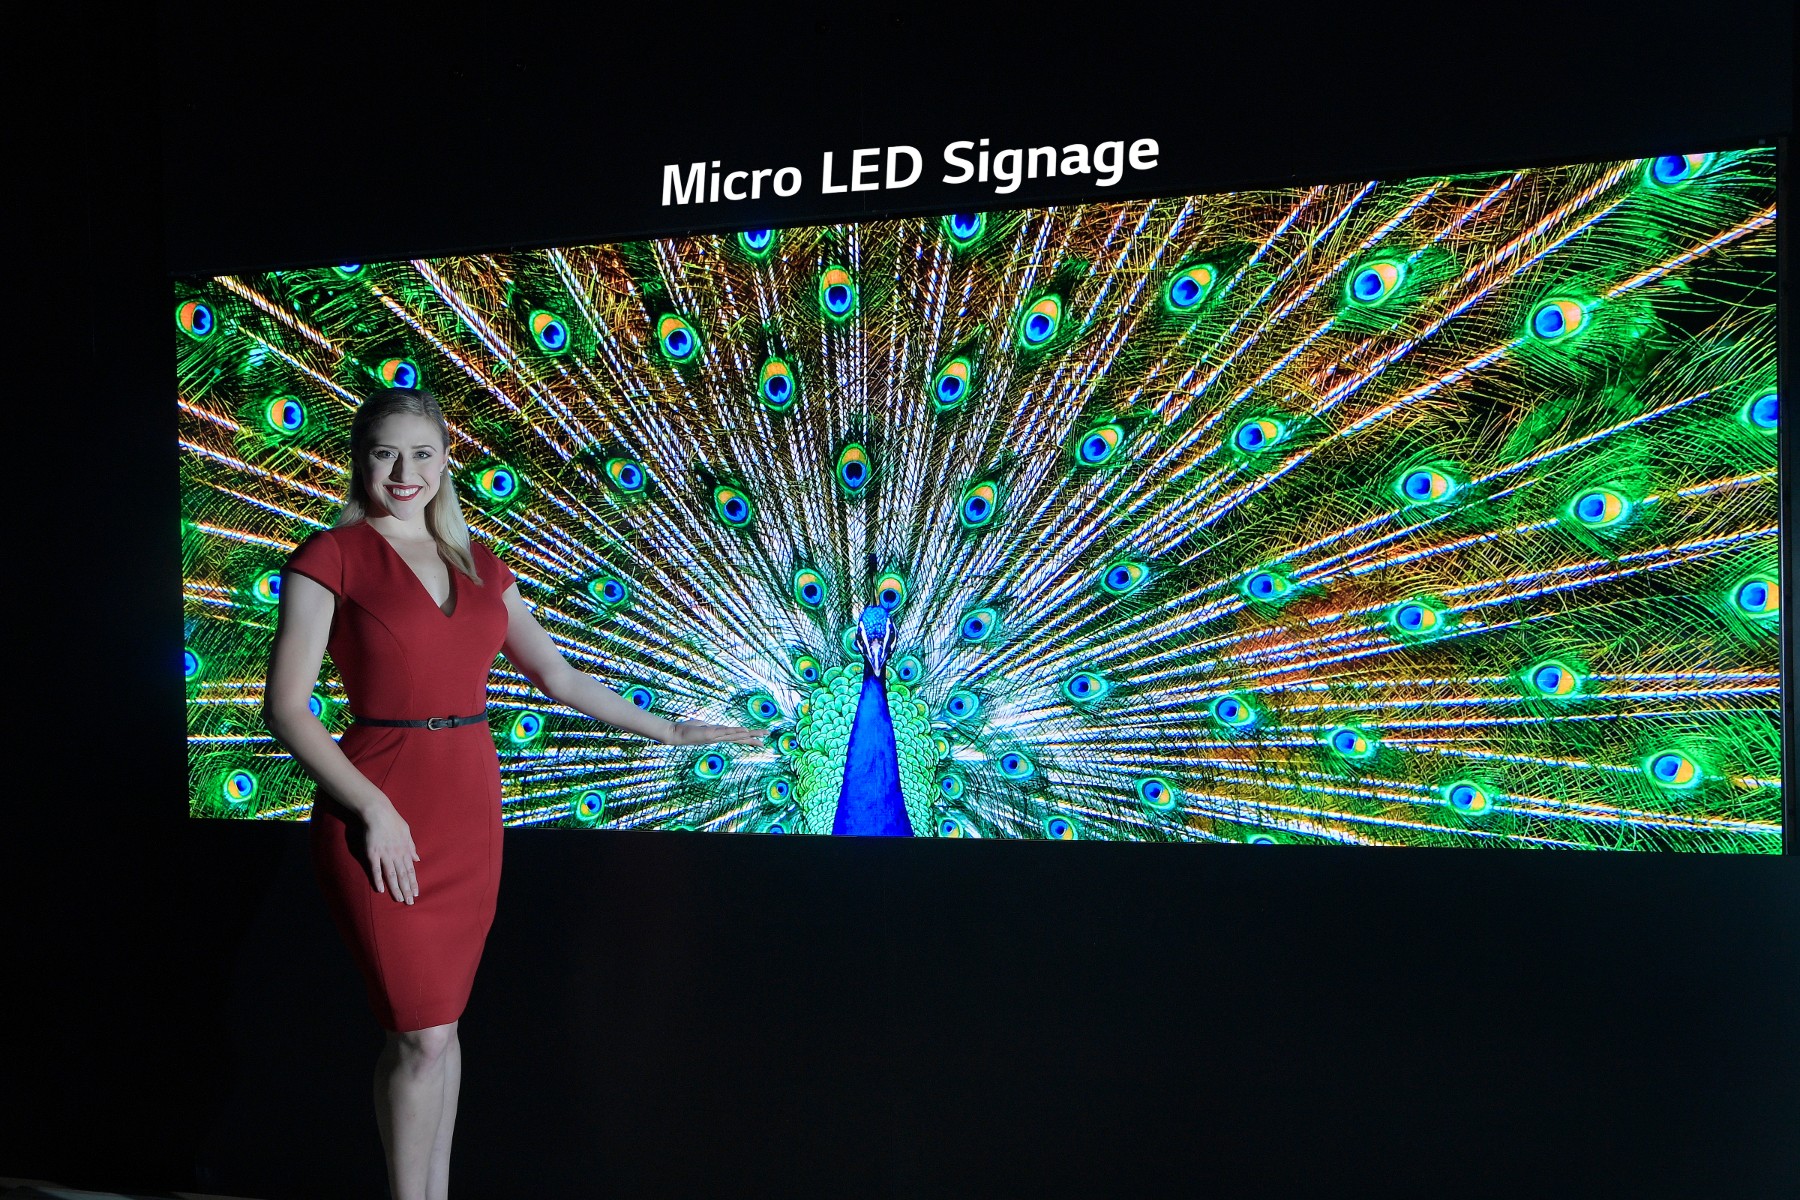 INNOVATIONS LED BY MICRO LED SIGNAGE 